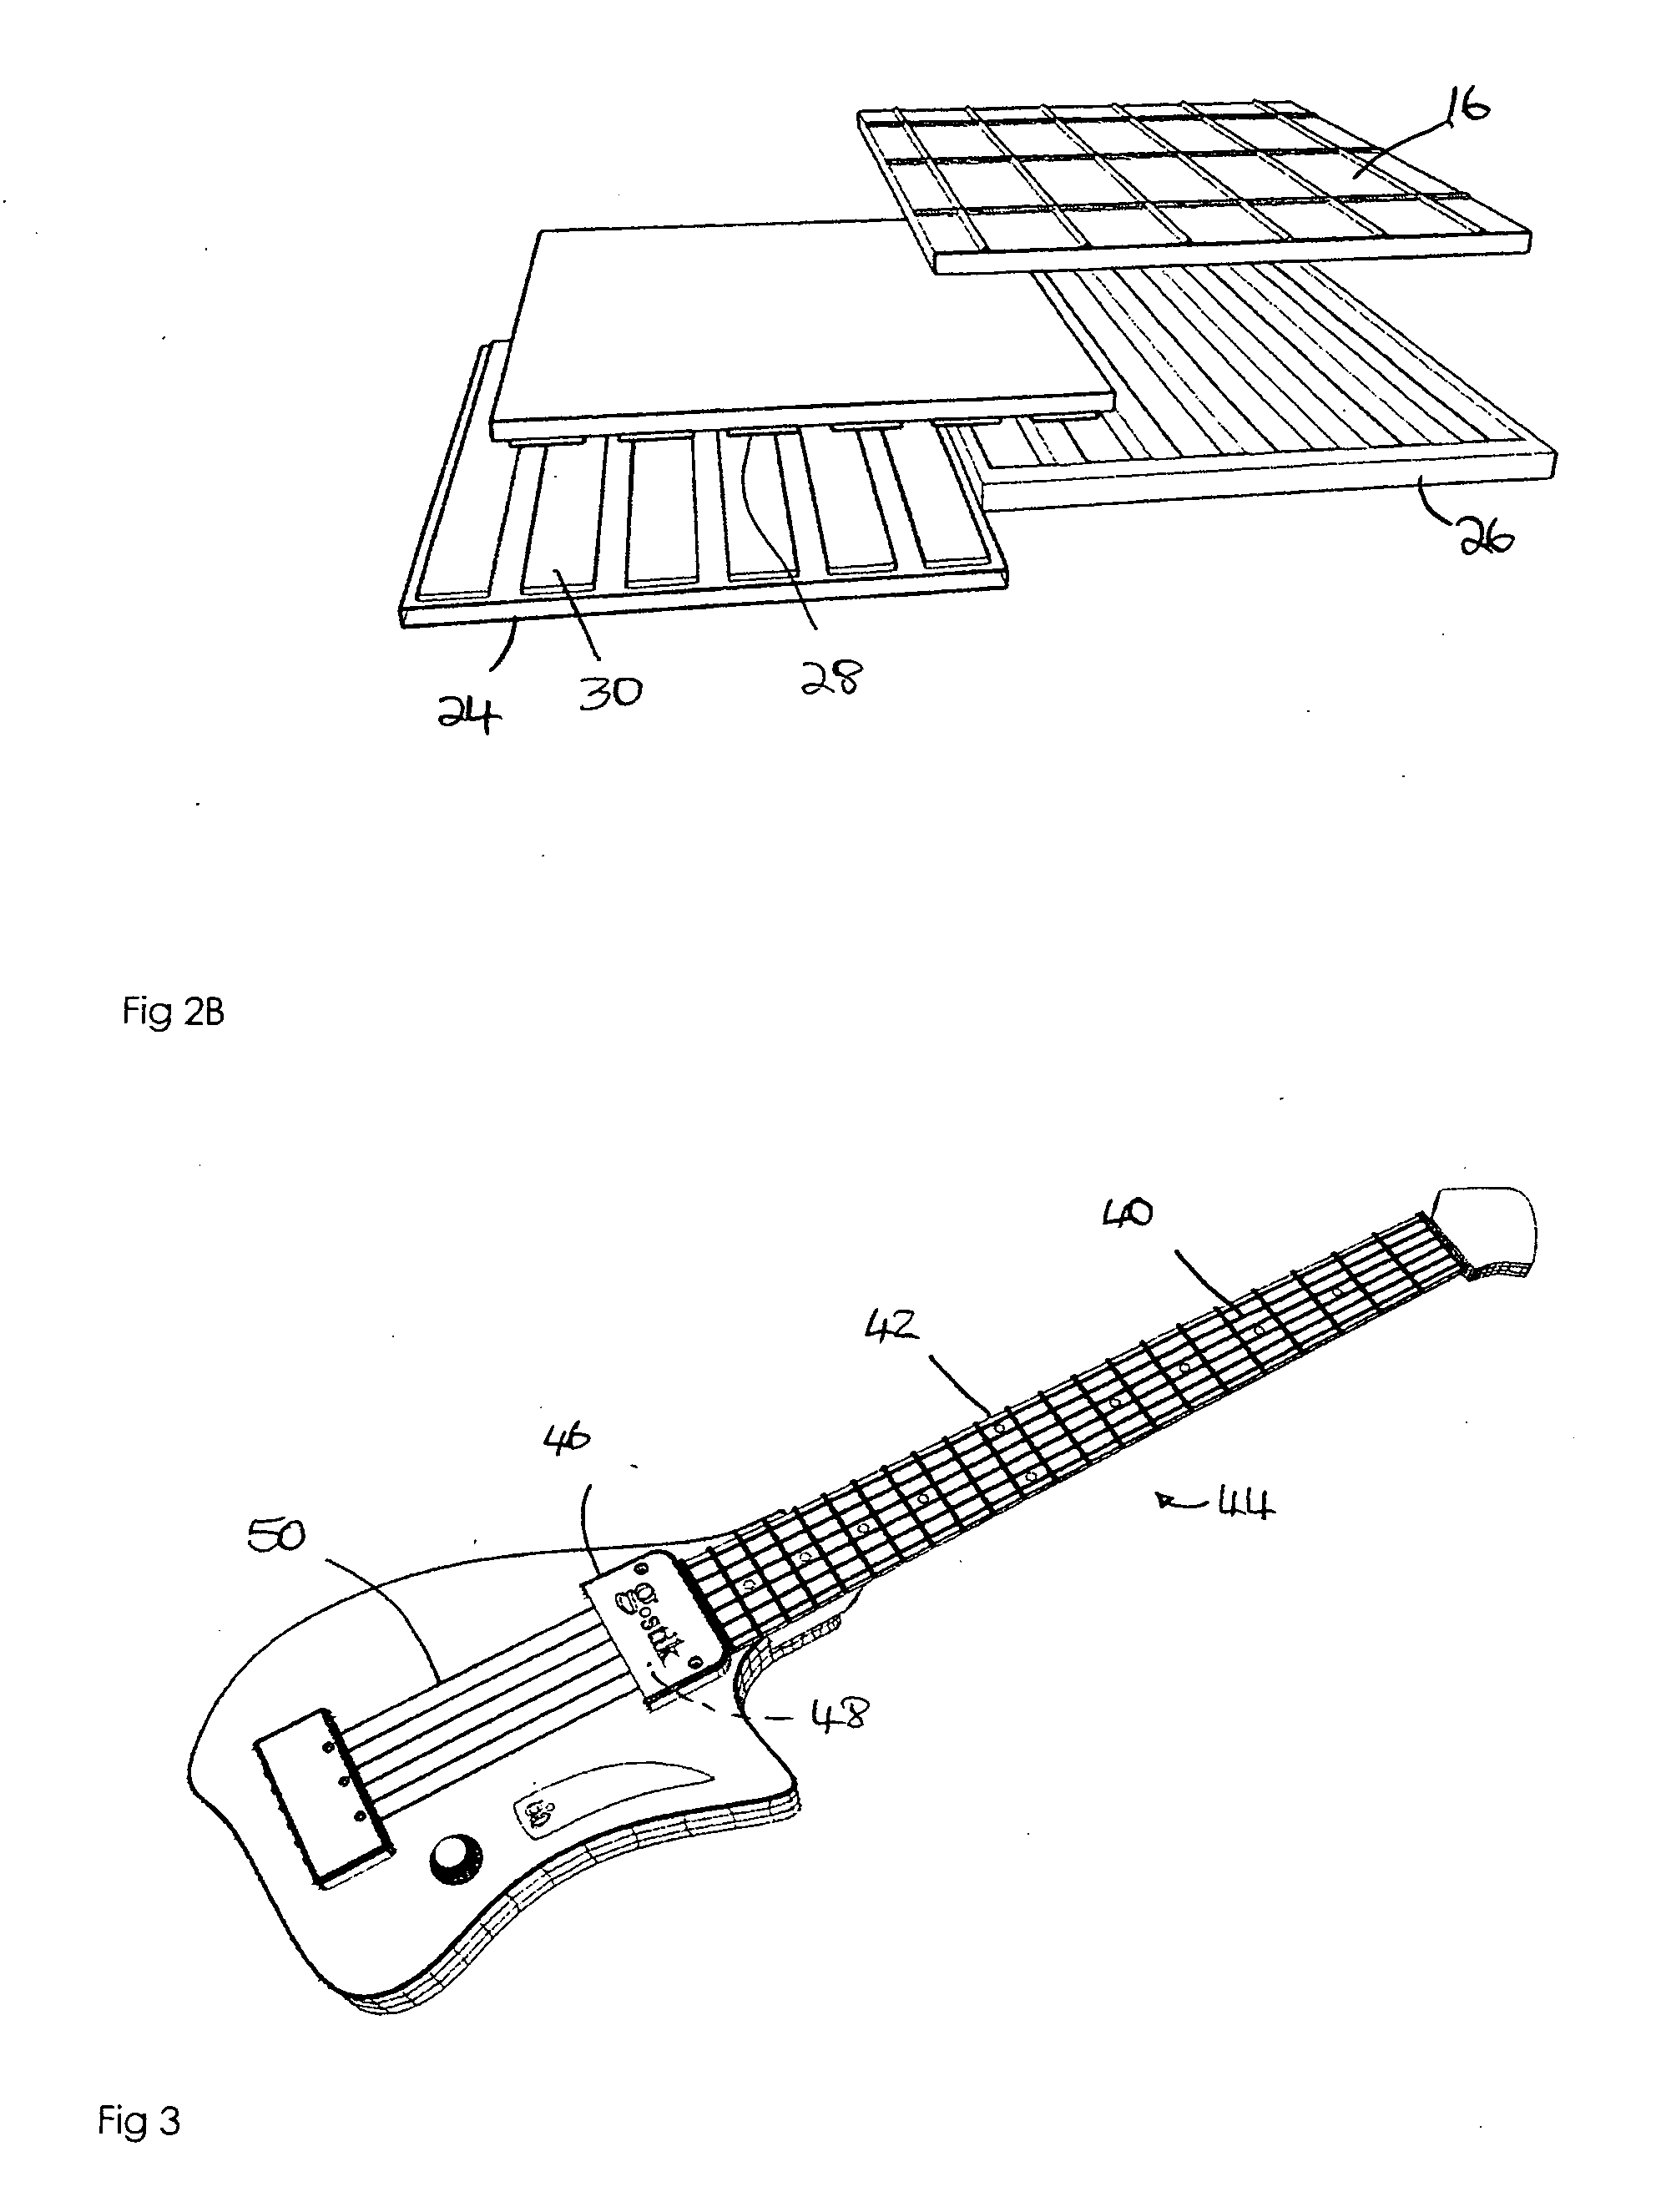 Electronic fingerboard for stringed instrument